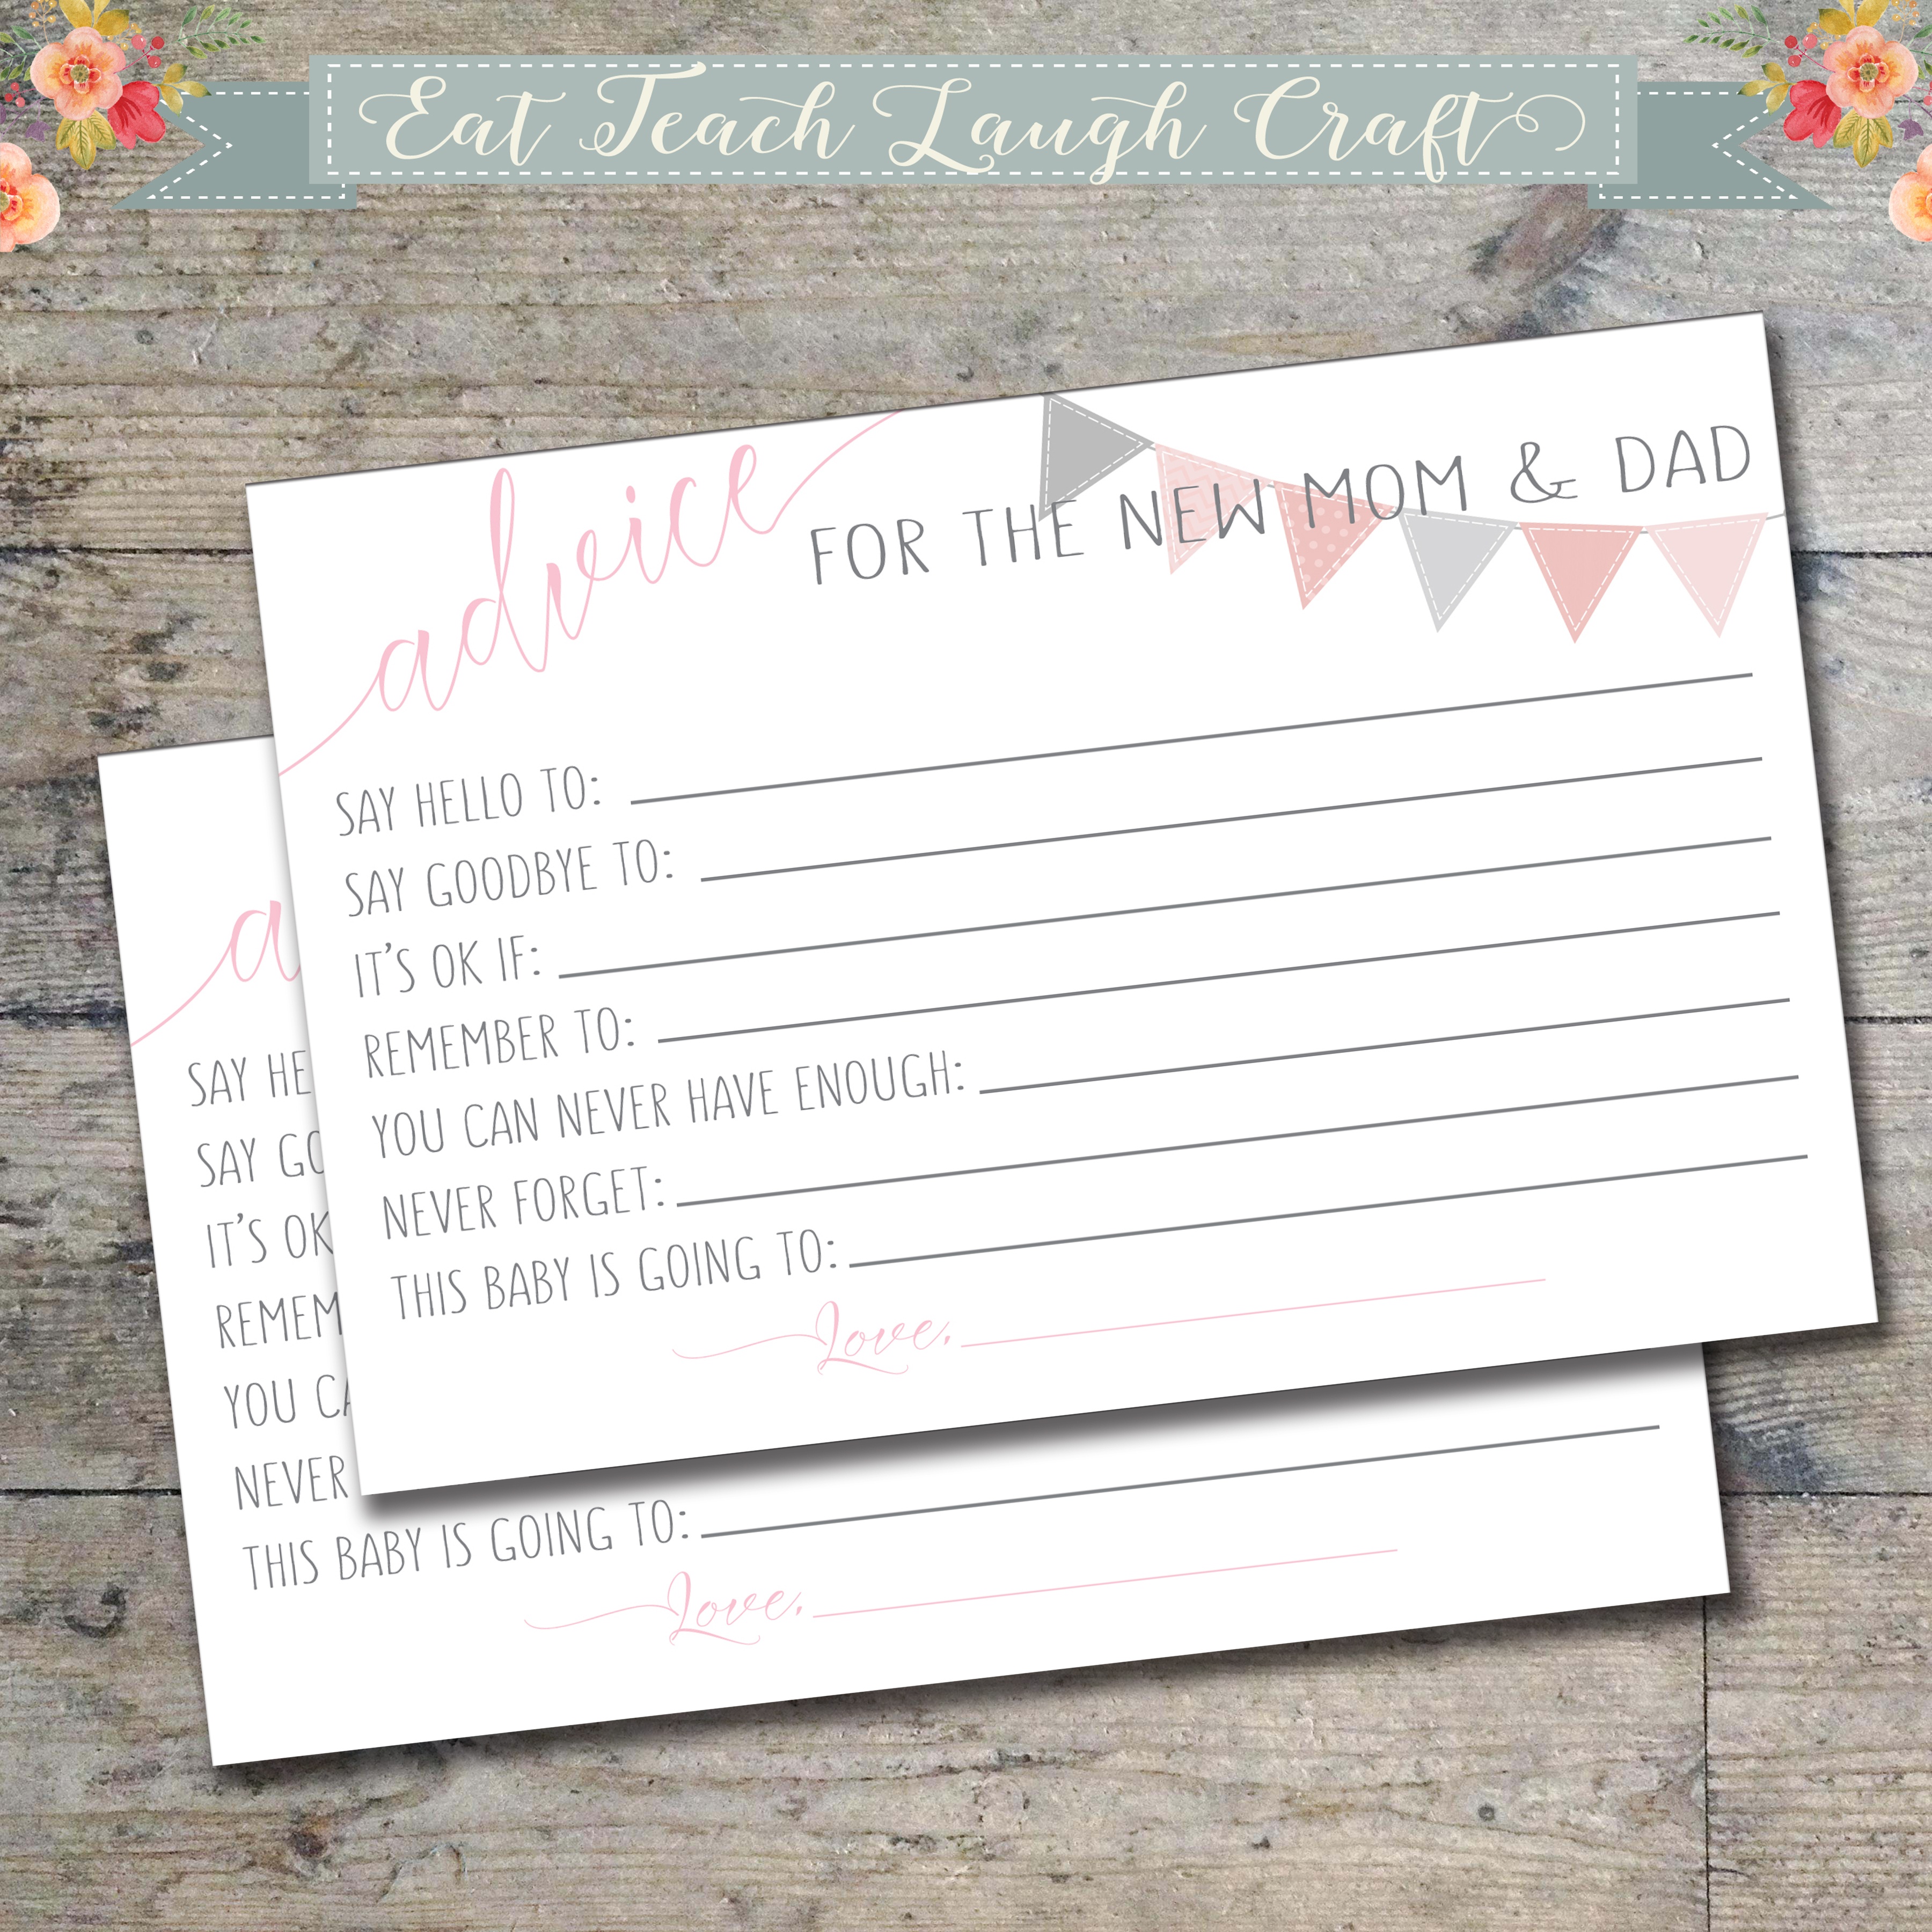 Advice For The New Mom And Dad: Baby Shower Album - Eat Teach Laugh - Free Mommy Advice Cards Printable